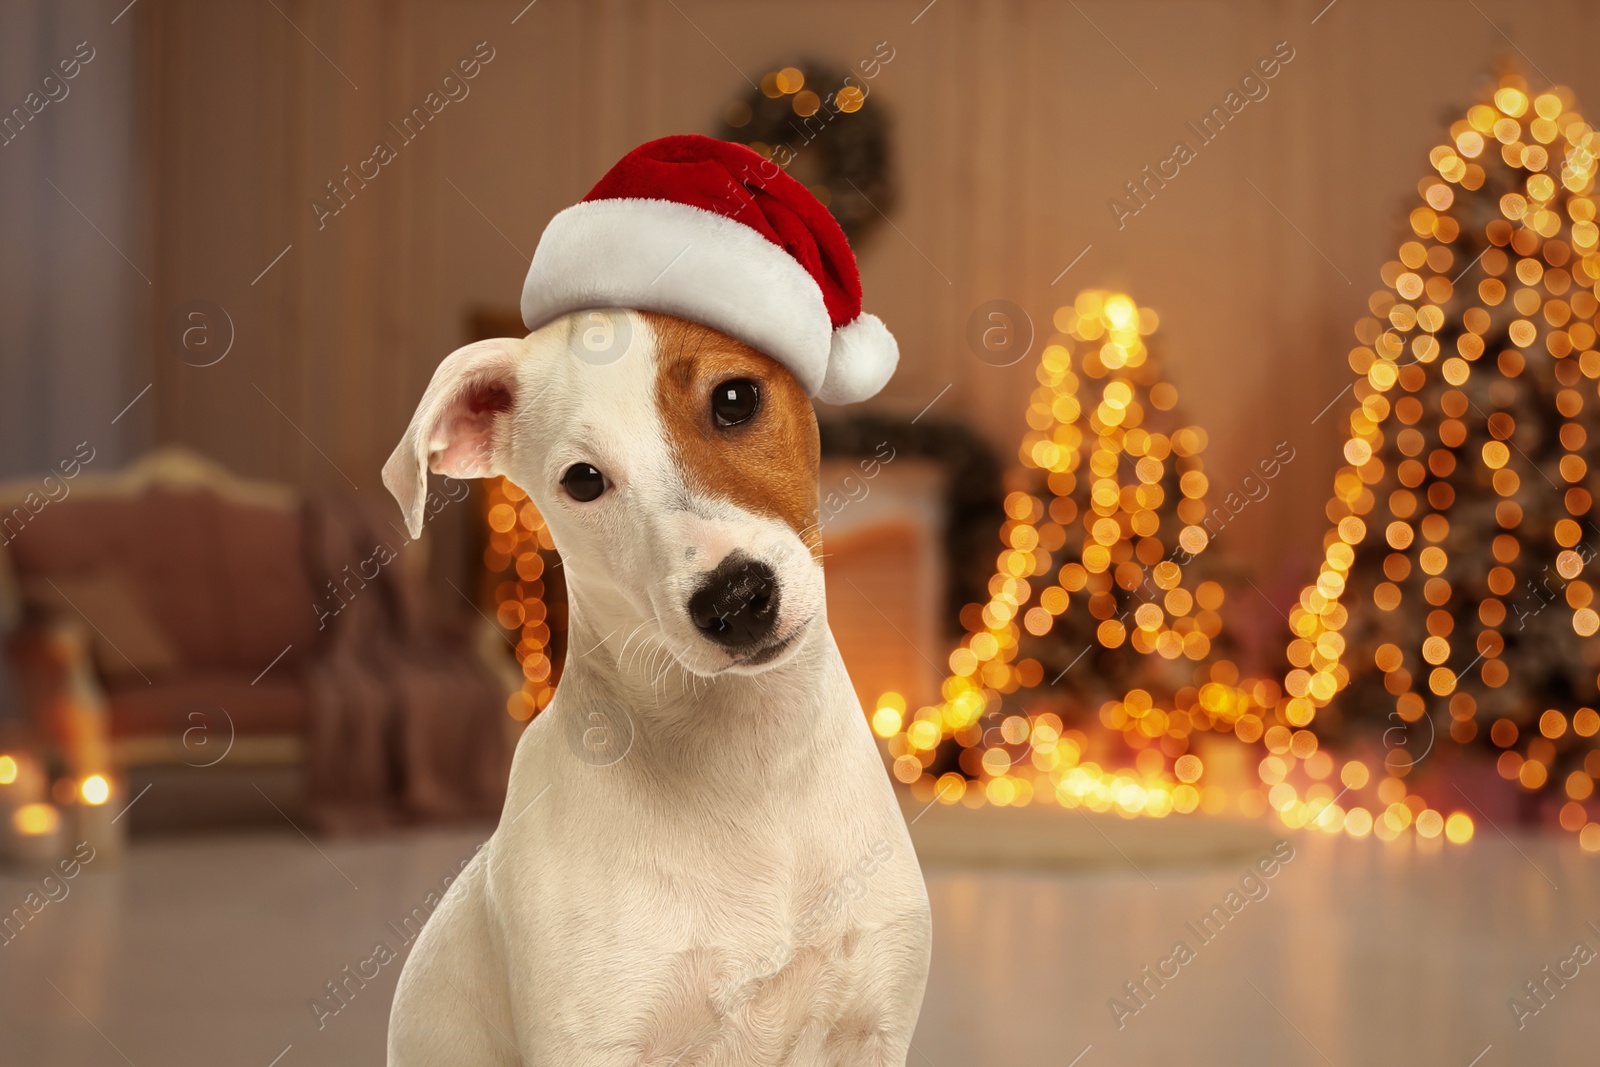 Image of Cute Jack Russel Terrier dog with Santa hat and room decorated for Christmas on background